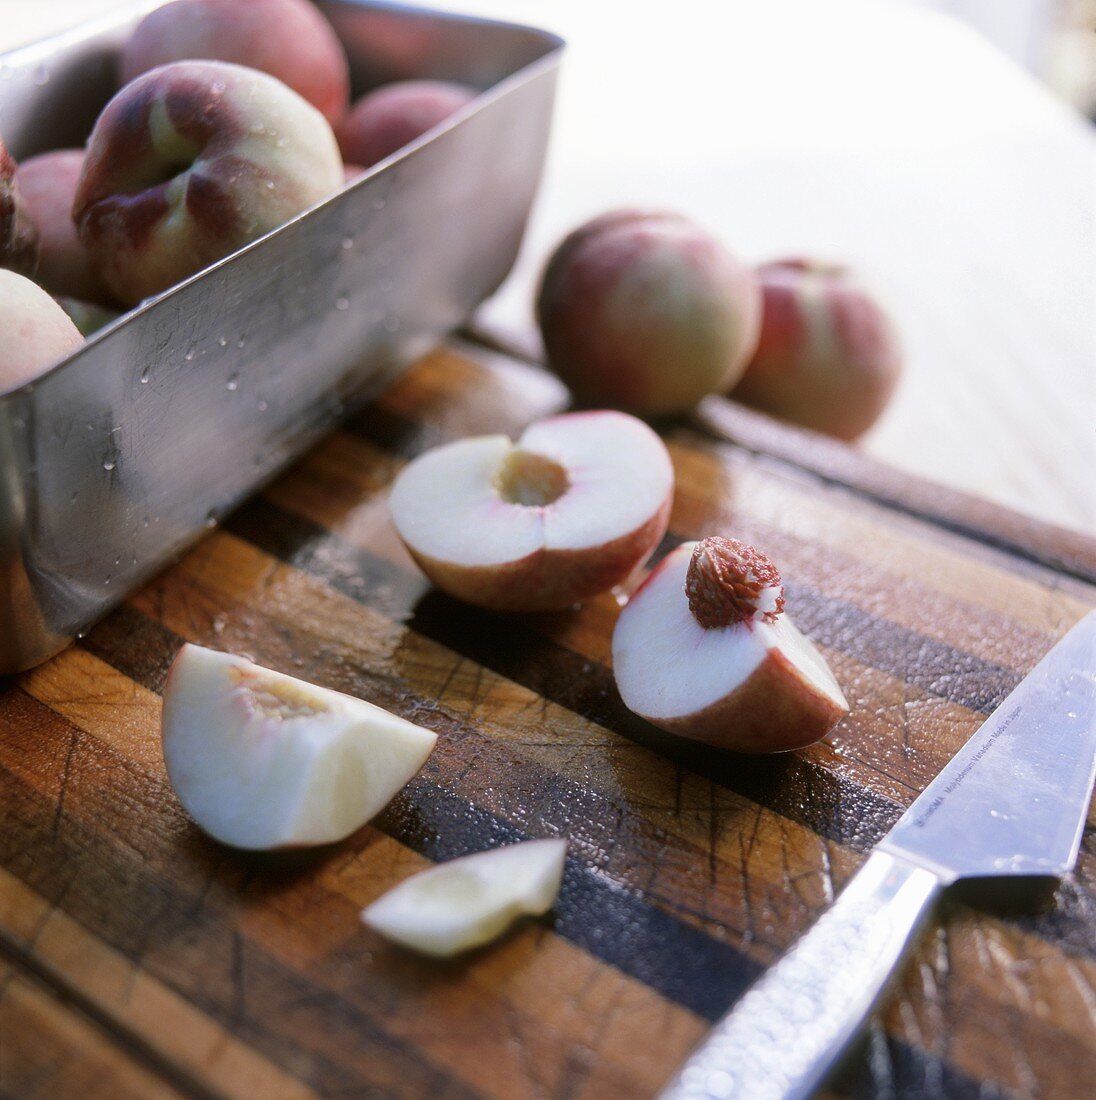 Peaches, whole and cut into pieces, on a wooden board